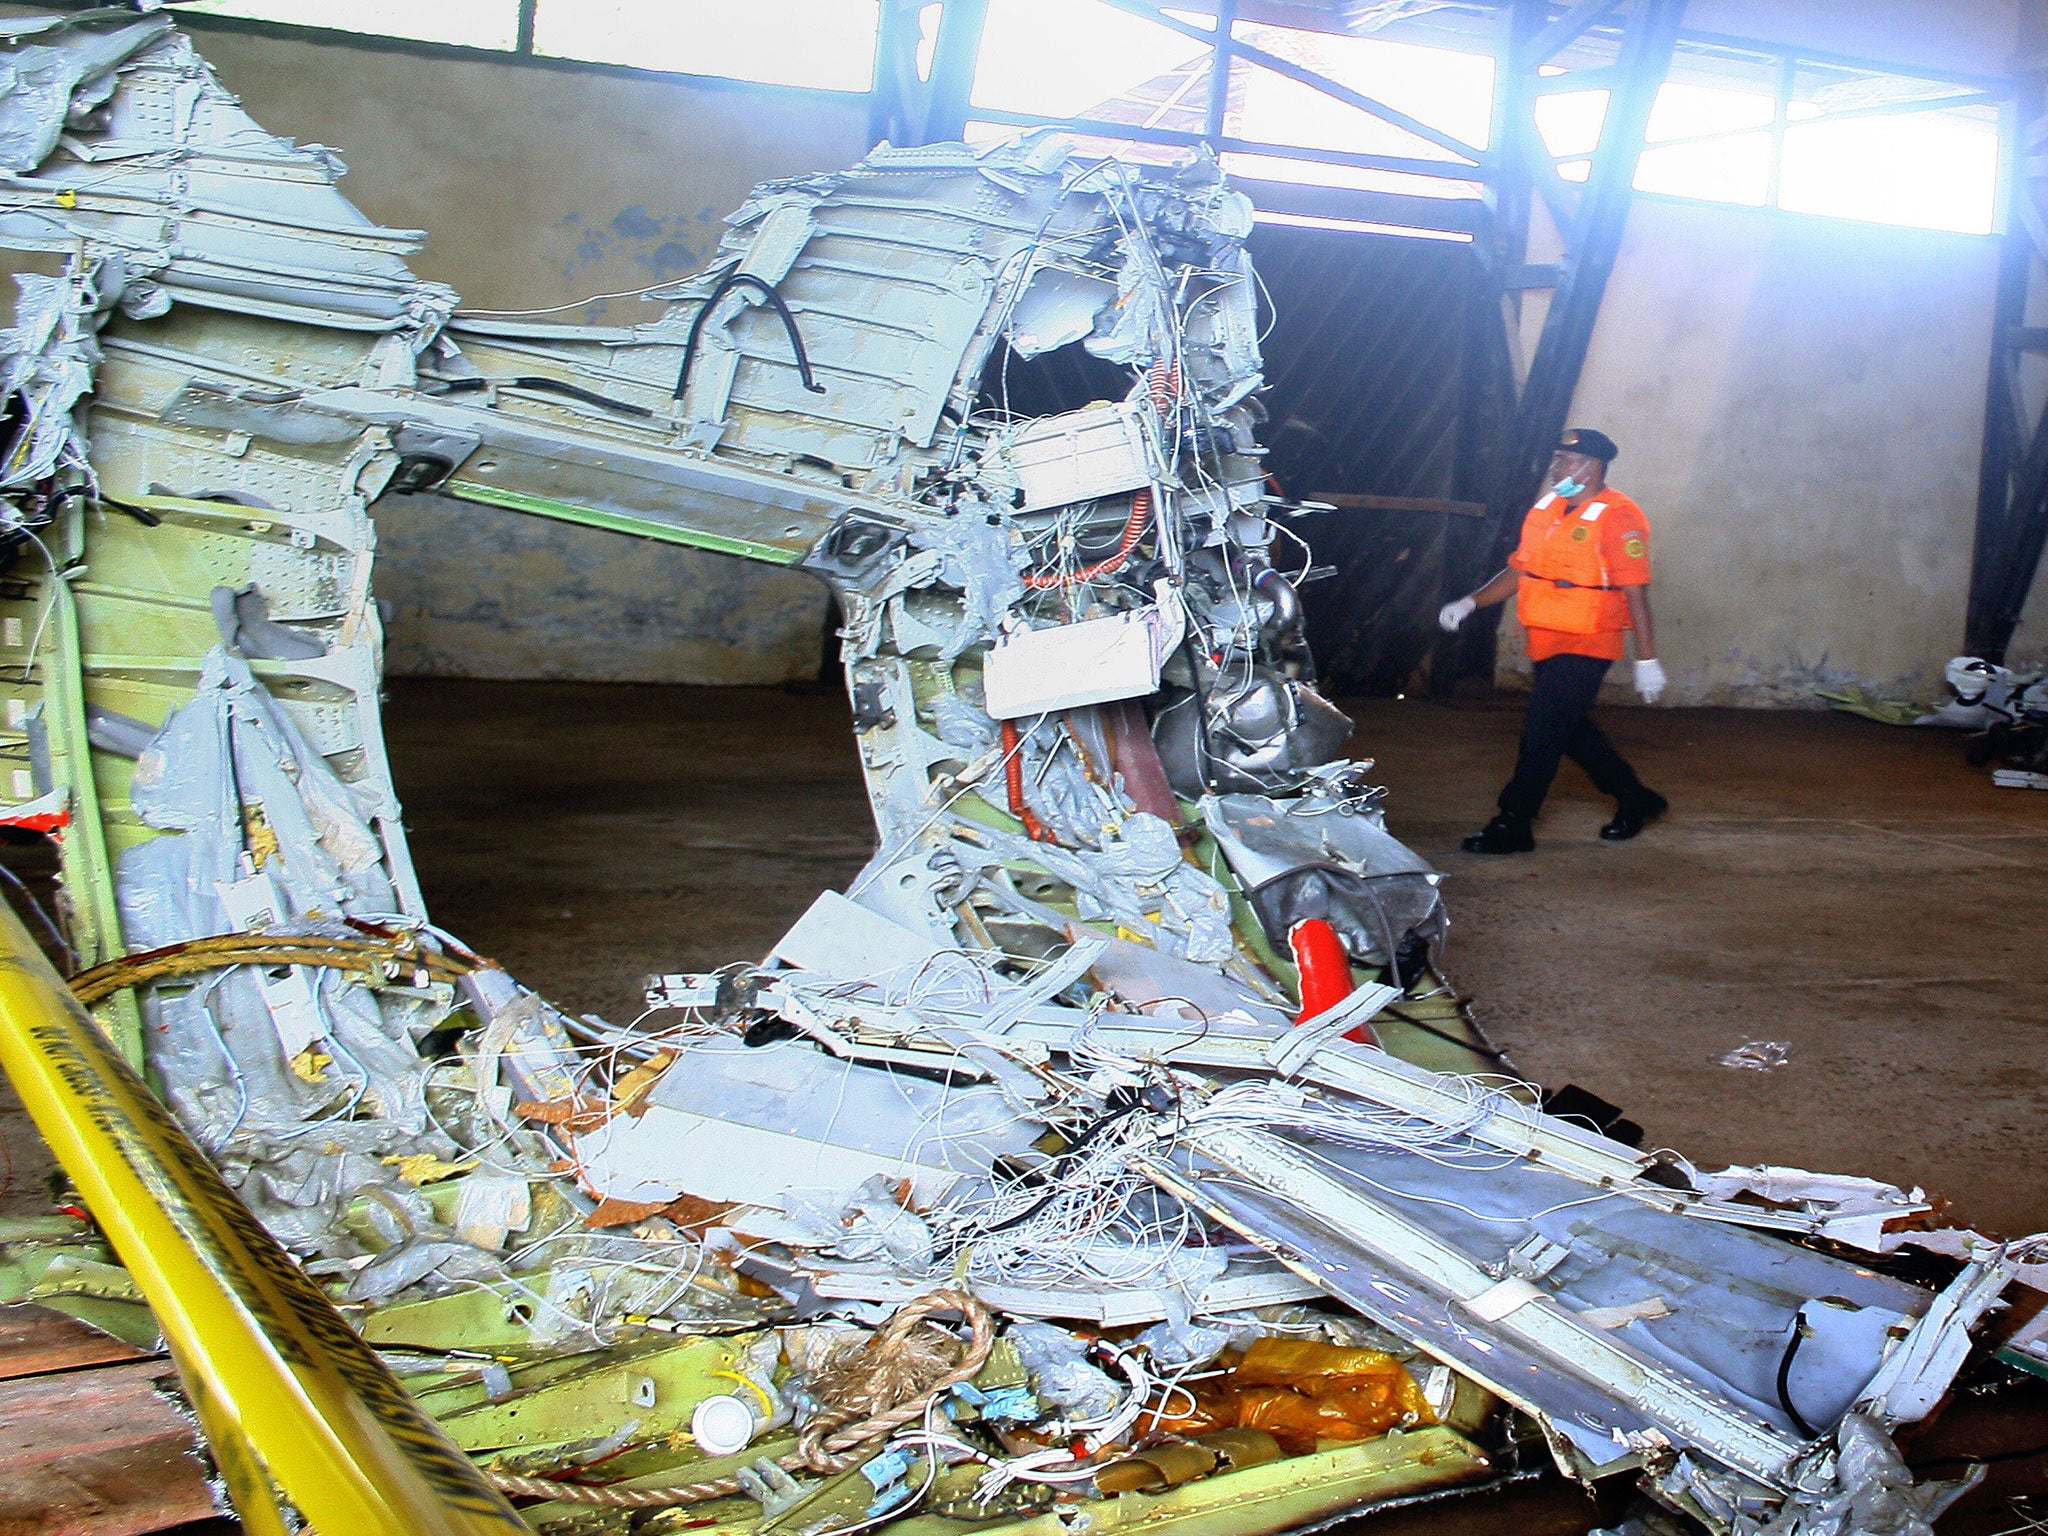 A member of Indonesia's search and rescue team walks past wreckage of AirAsia flight QZ8501 recovered at sea and stored in a warehouse for investigators in Kumai, Central Kalimantan on Borneo island